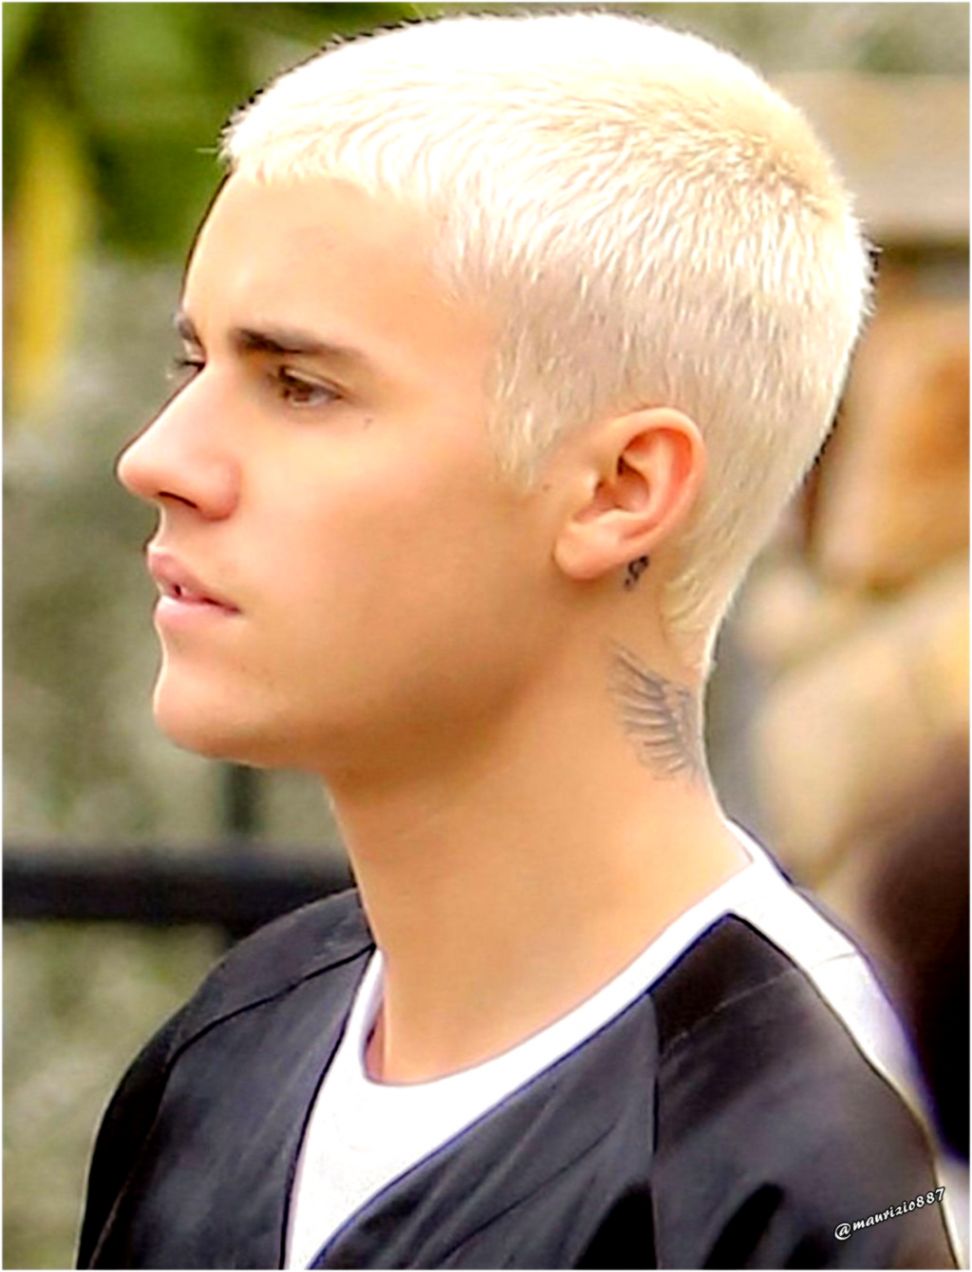 Find Out Full Gallery Of Wonderful Justin Bieber Hairstyle - Short Blond Hair Men - HD Wallpaper 